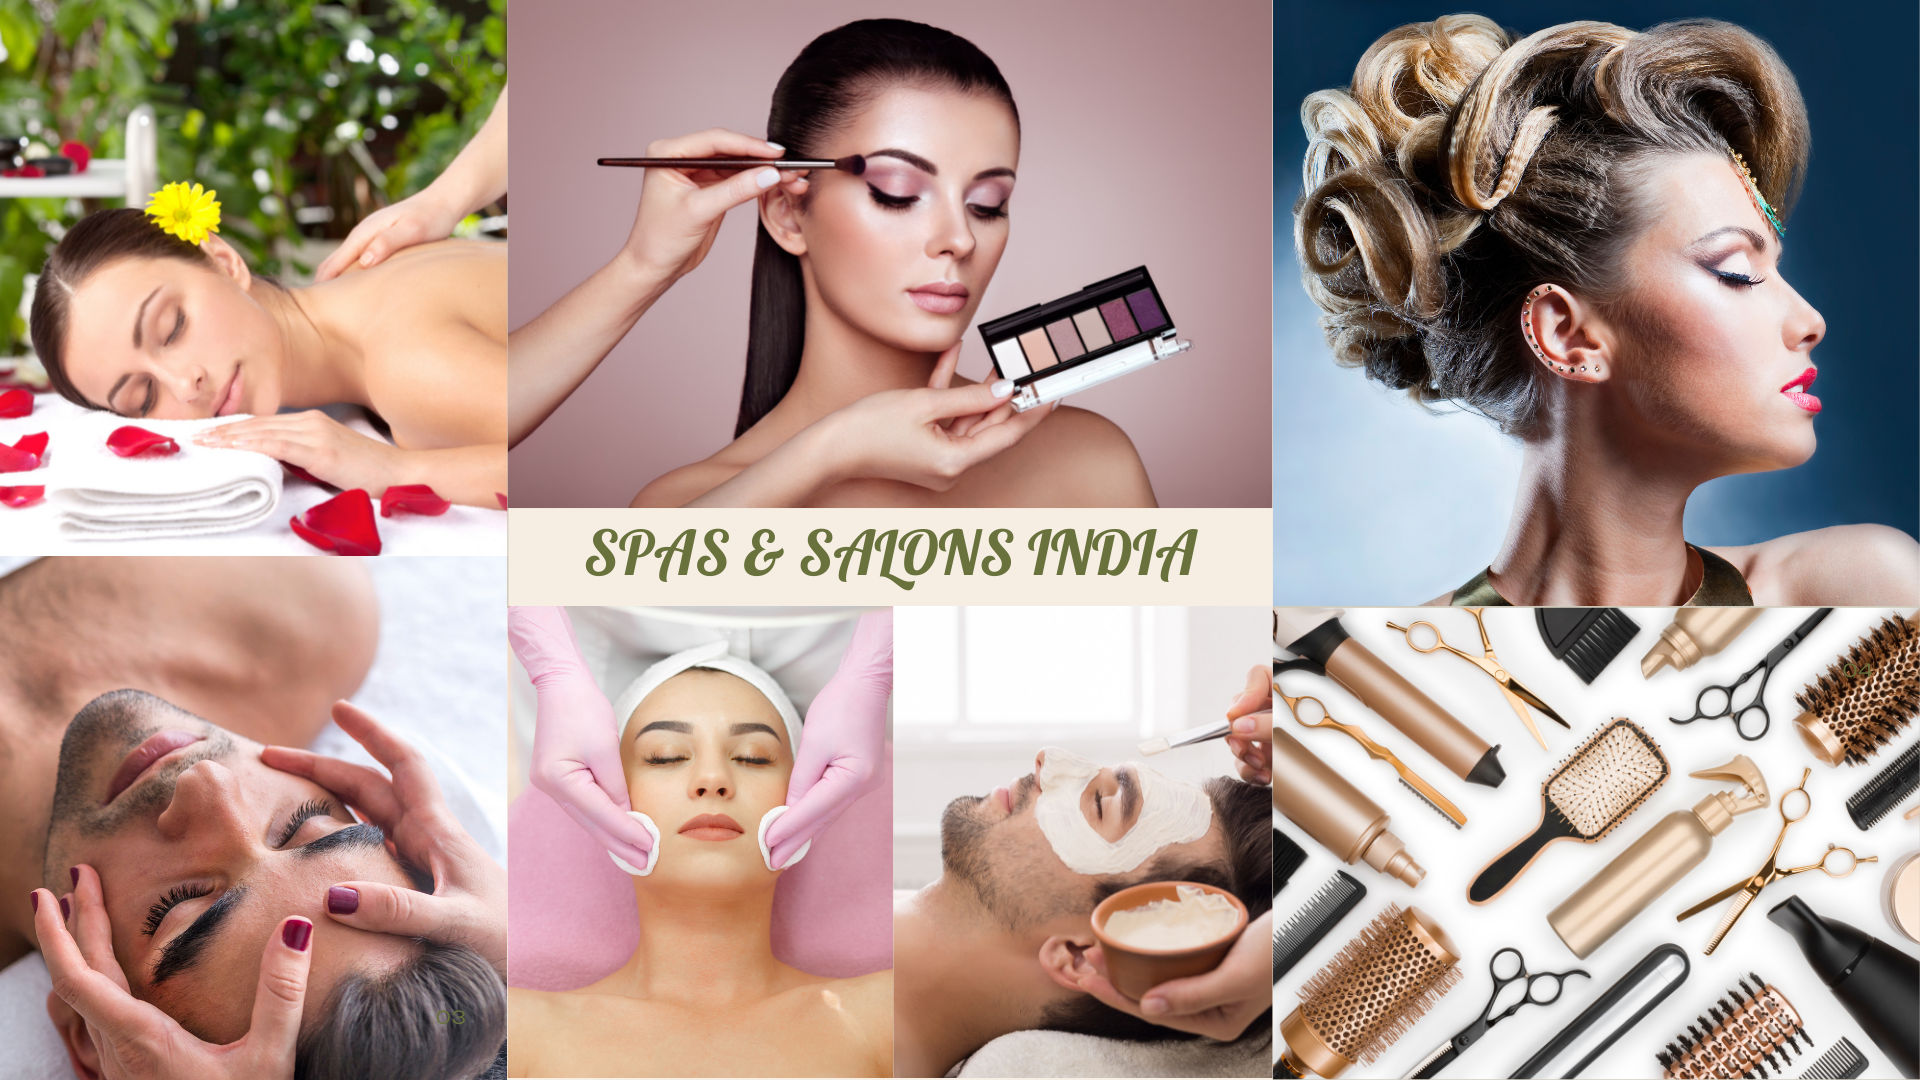 Skin Care Hair Care Cosmetics Makeup Tattoo Hairstyle Products Services - Spas Salons India